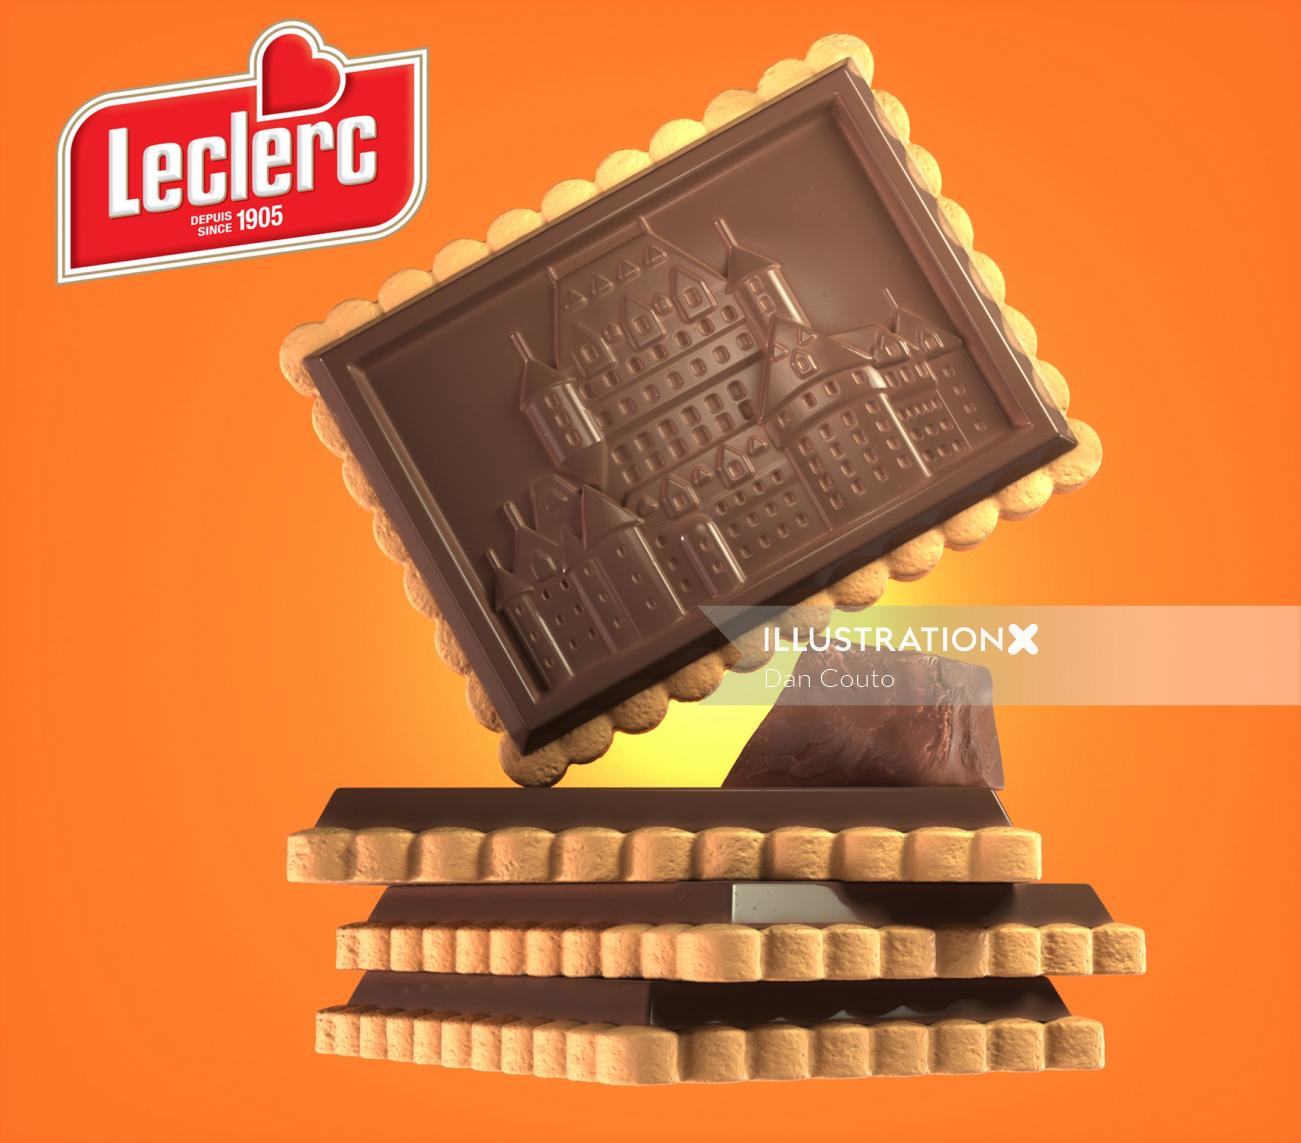 Leclerc Milk Chocolate Biscuits advertising illustration